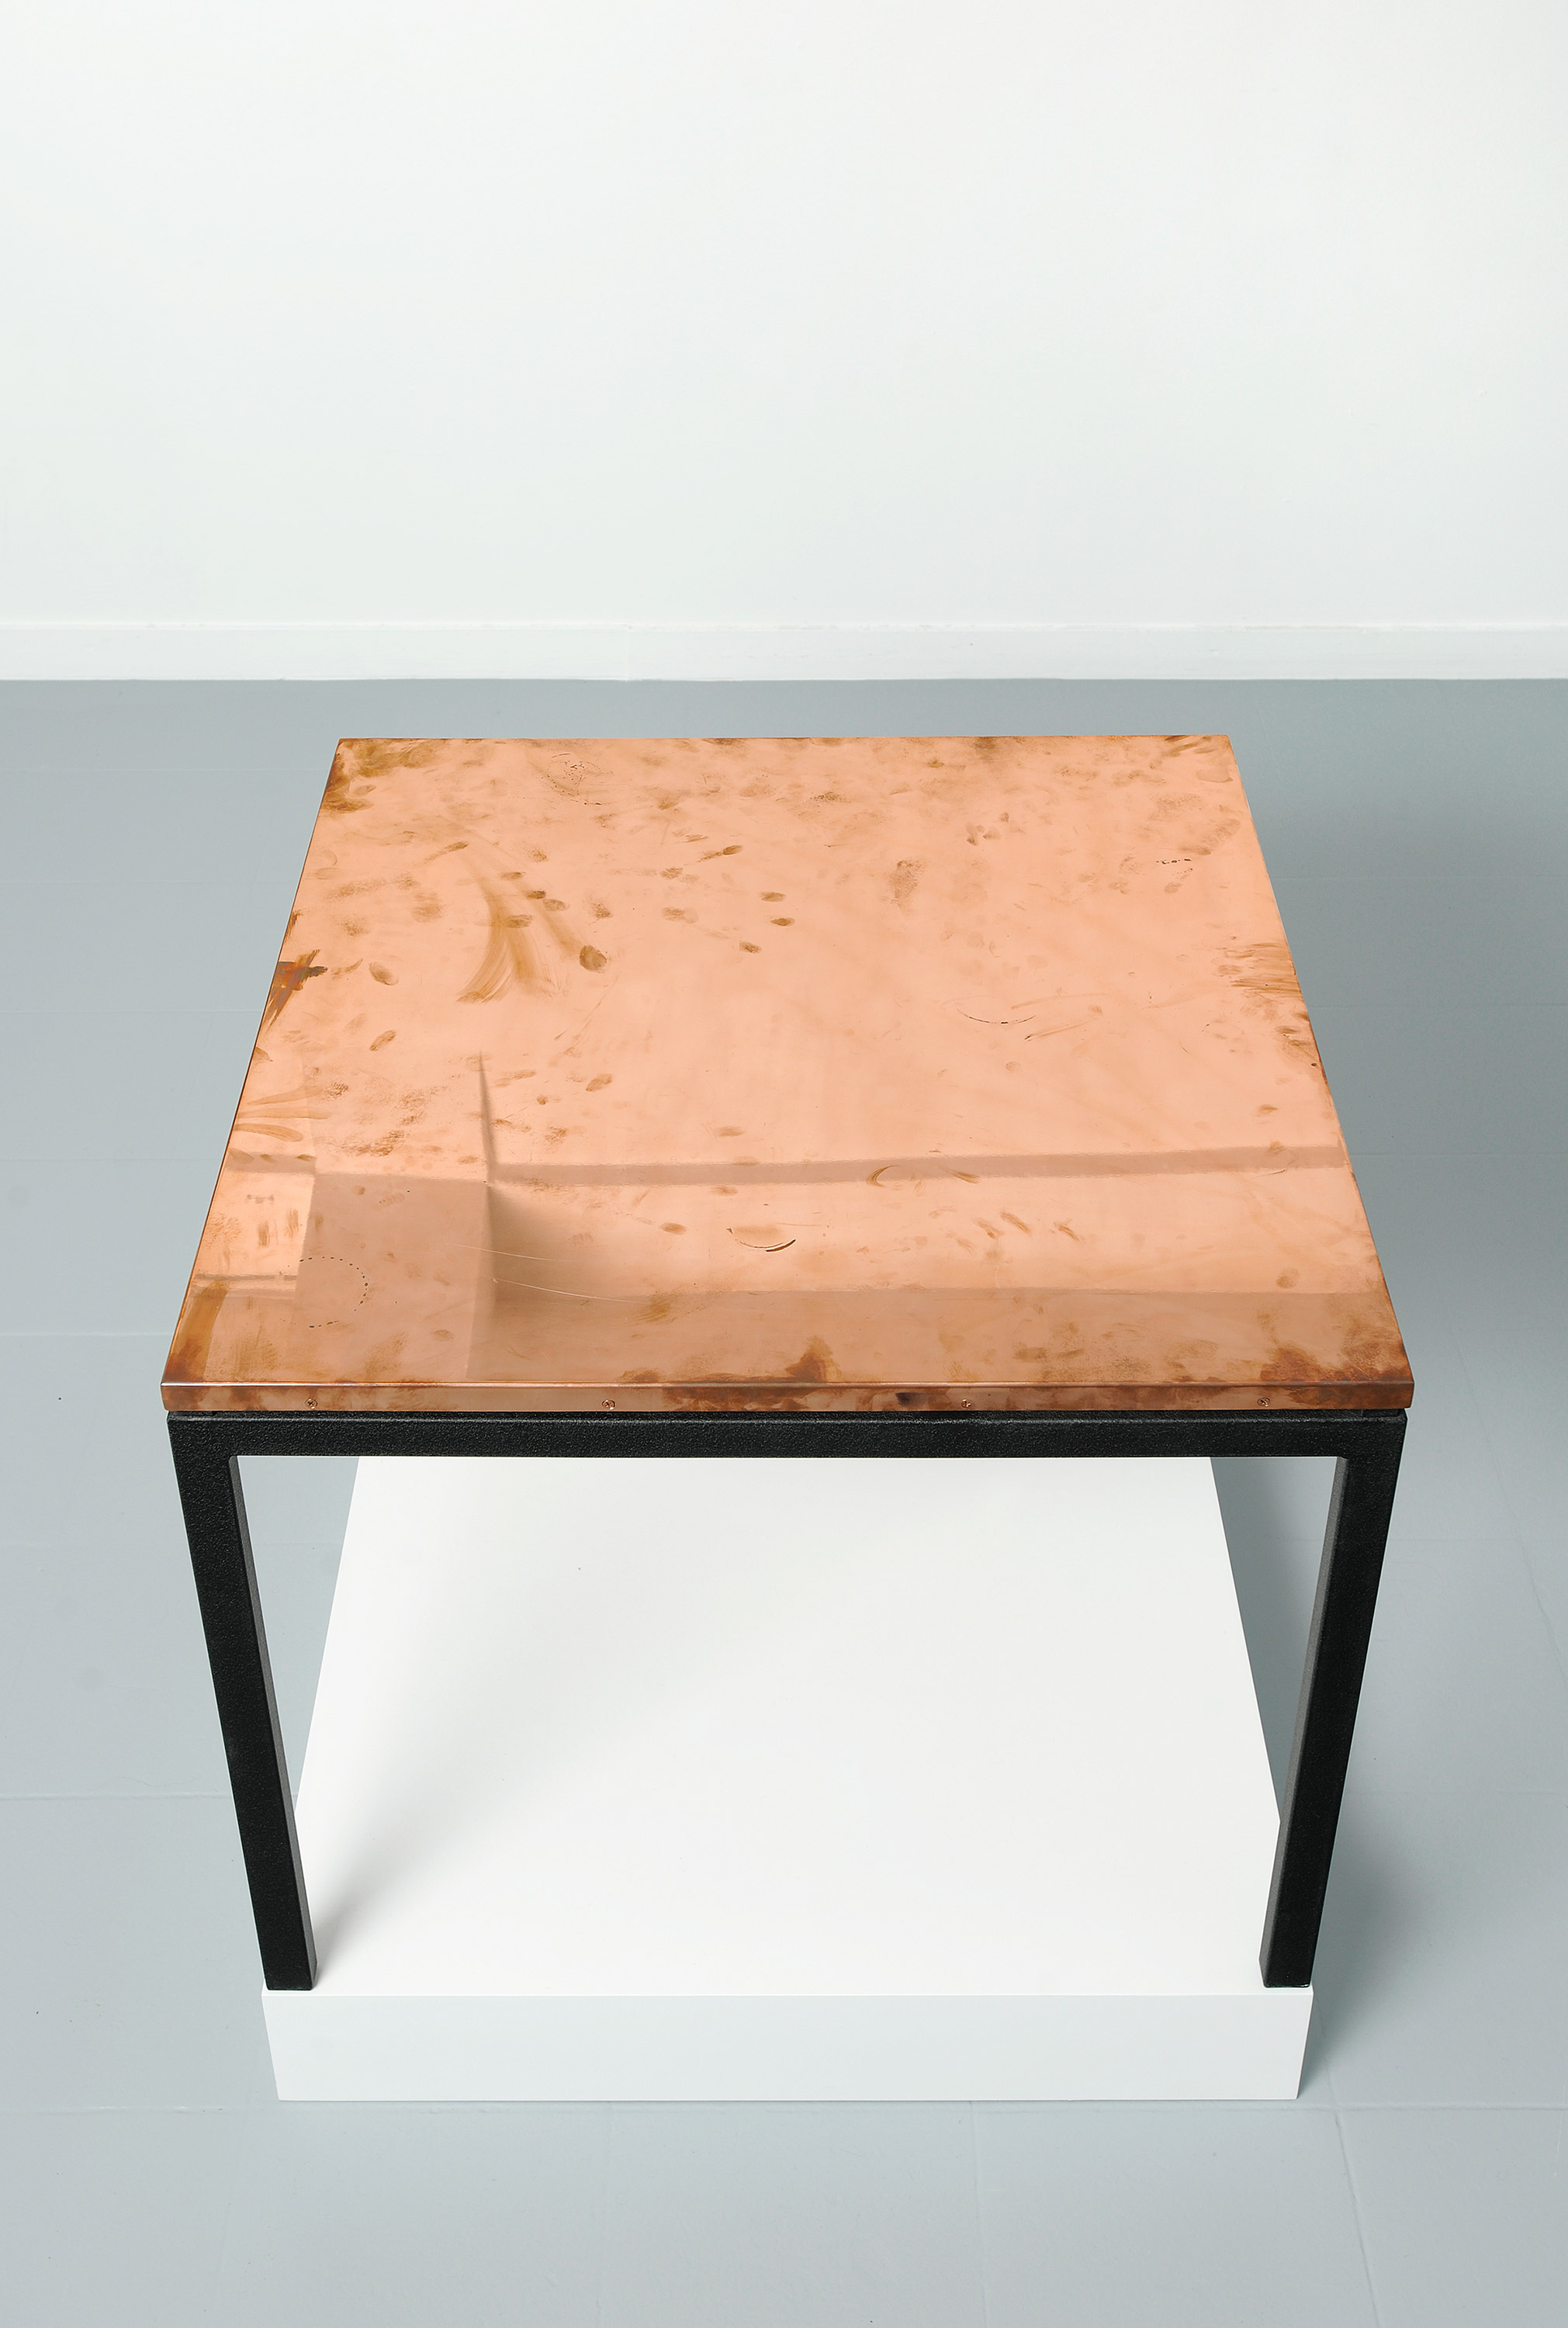   Copper Surrogate (Table: designed by Charlotte Perriand and Le Corbusier, 1959; Galerie Rodolphe Janssen, Brussels, Belgium, August 10th–September 2nd, 2011)   Polished copper table top and powder-coat steel   2011   Table: 33 5/8 x 33 5/8 x 1 inch